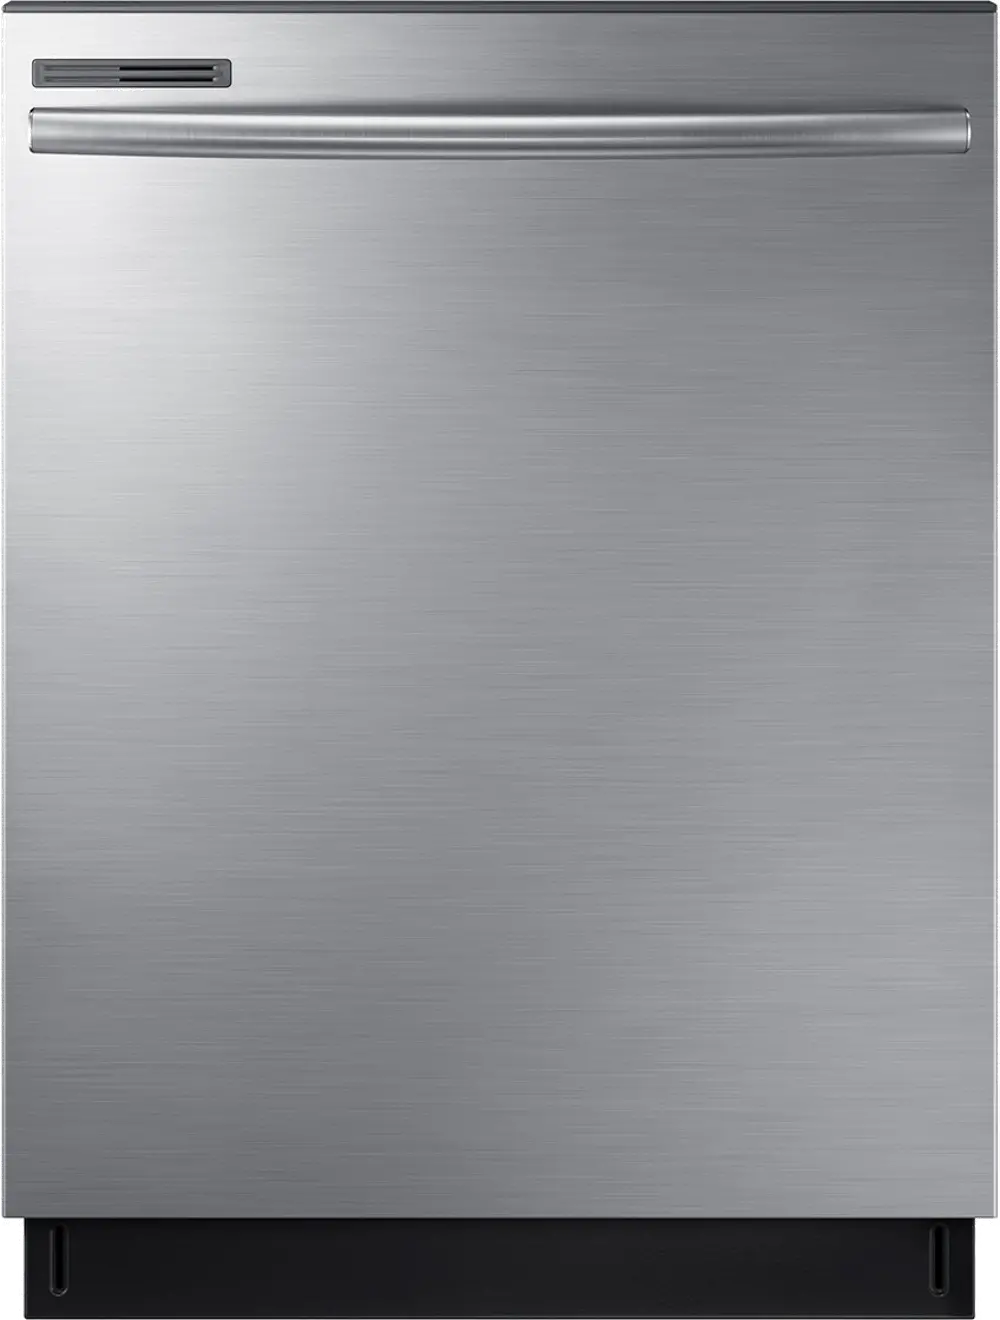 DW80M2020US Samsung Top Control Dishwasher with Quiet Operation - Stainless Steel-1